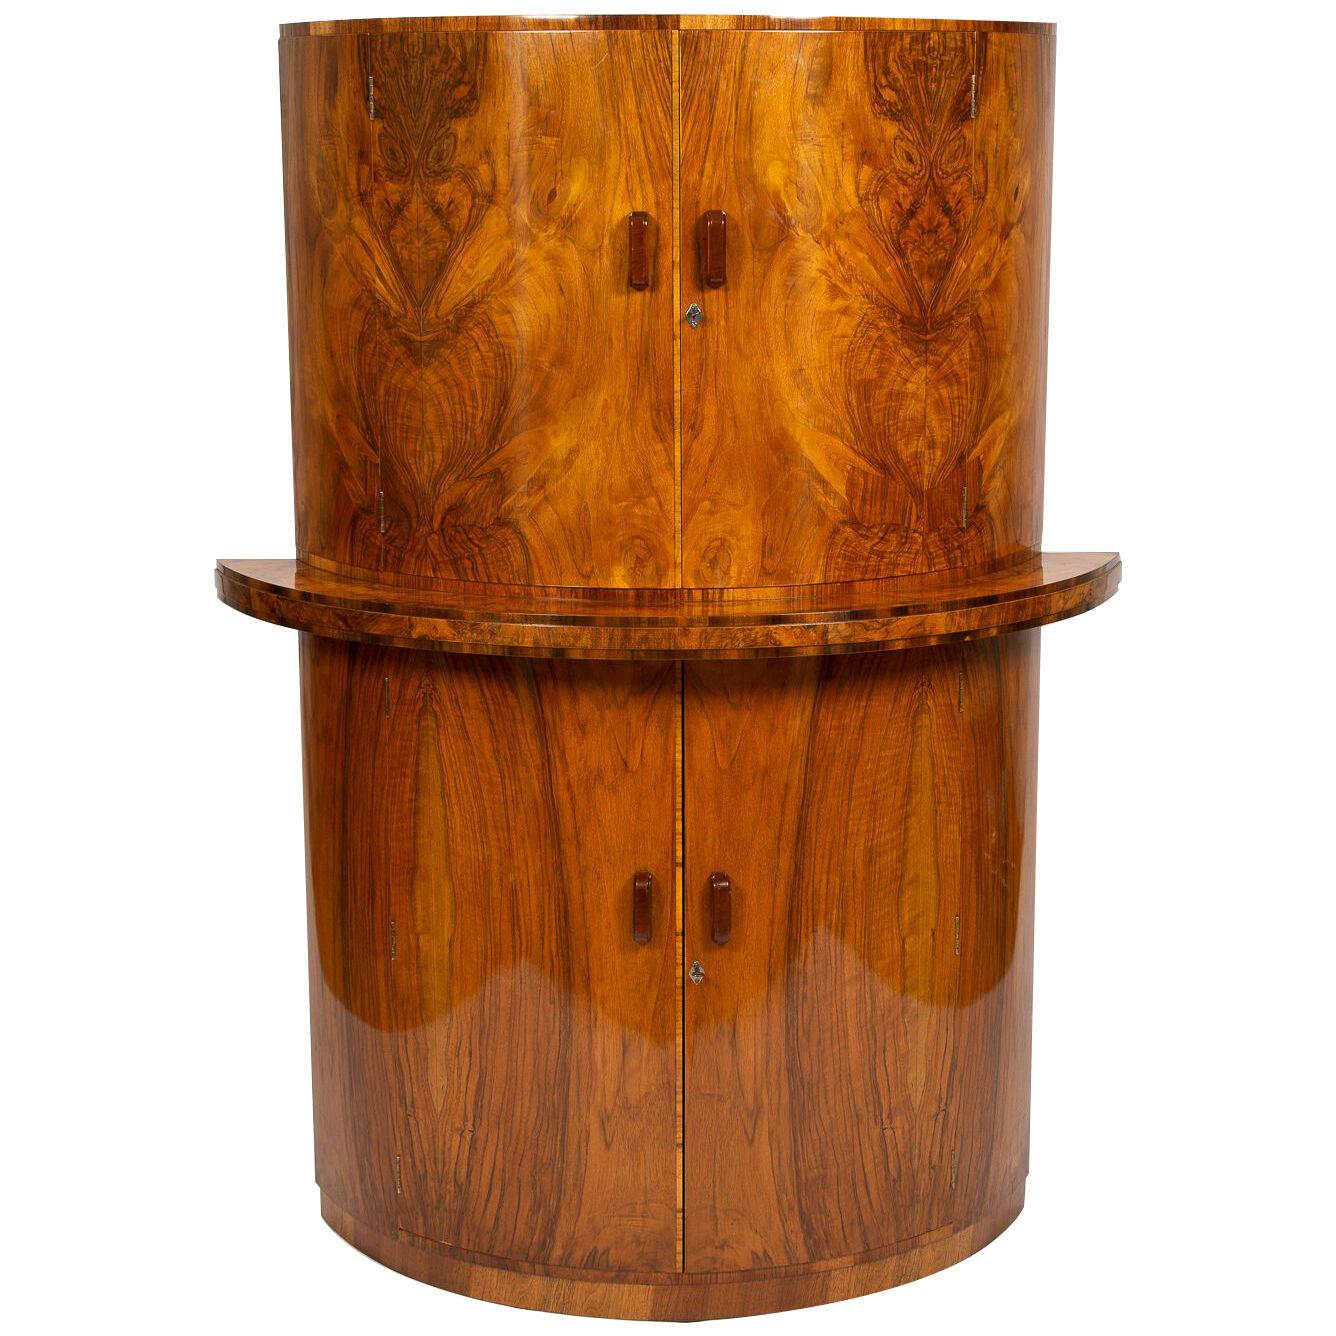 A walnut Art Deco demi-lune cocktail cabinet by Gold Feather, circa 1930.